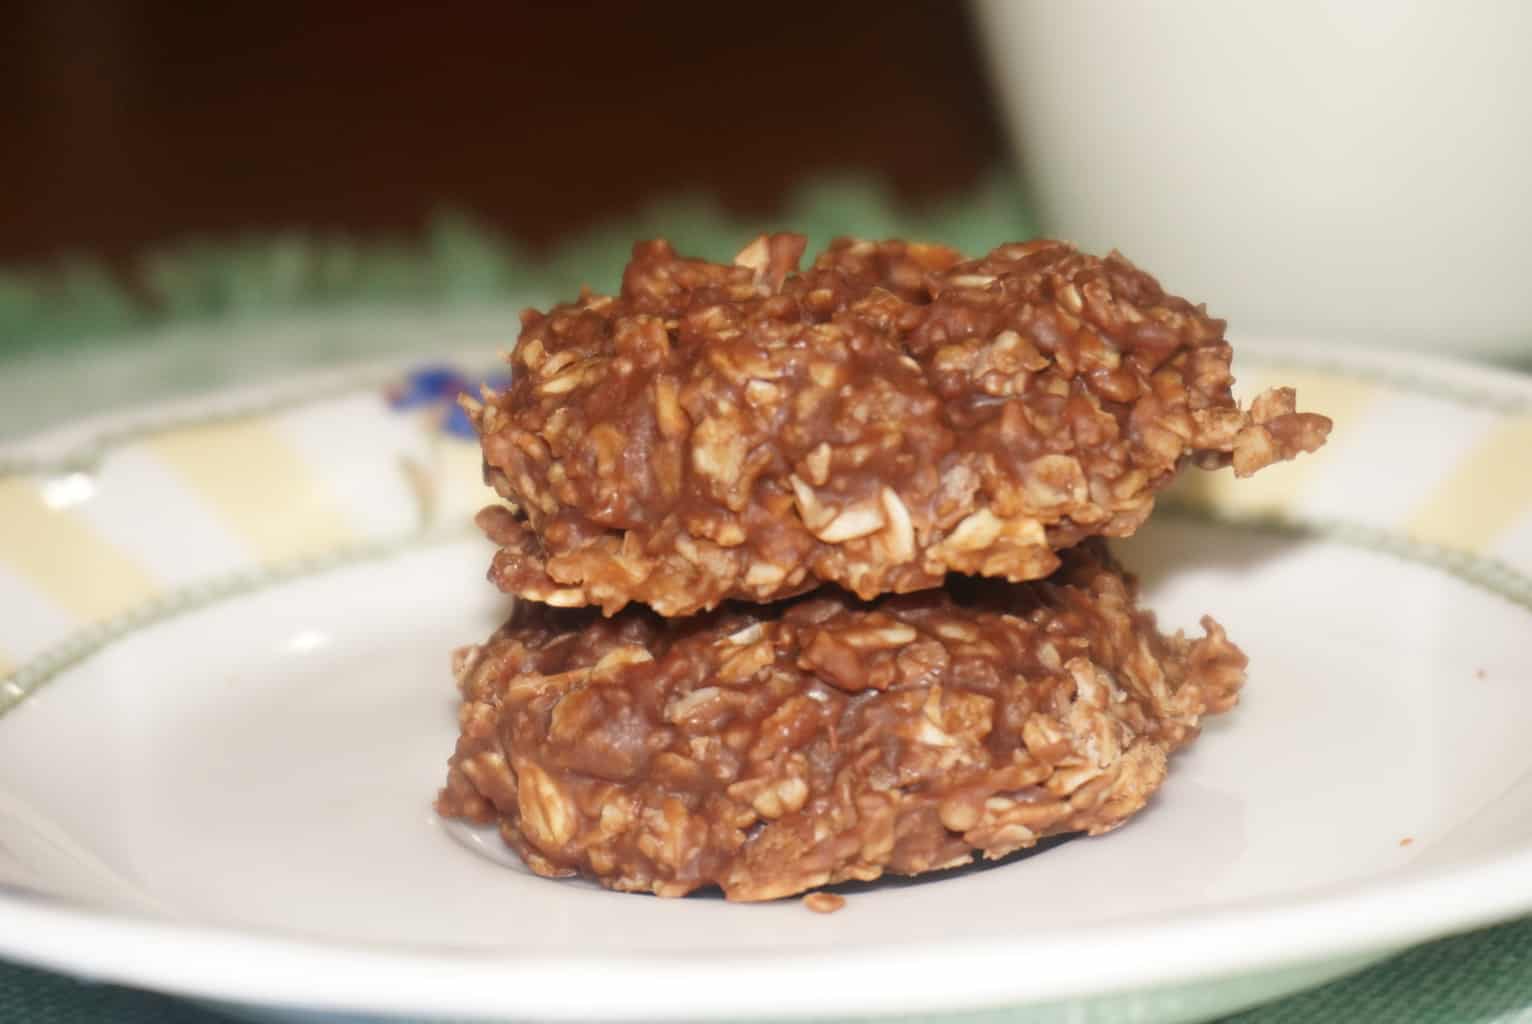 Chocolate Peanut Butter No-Bake Cookies